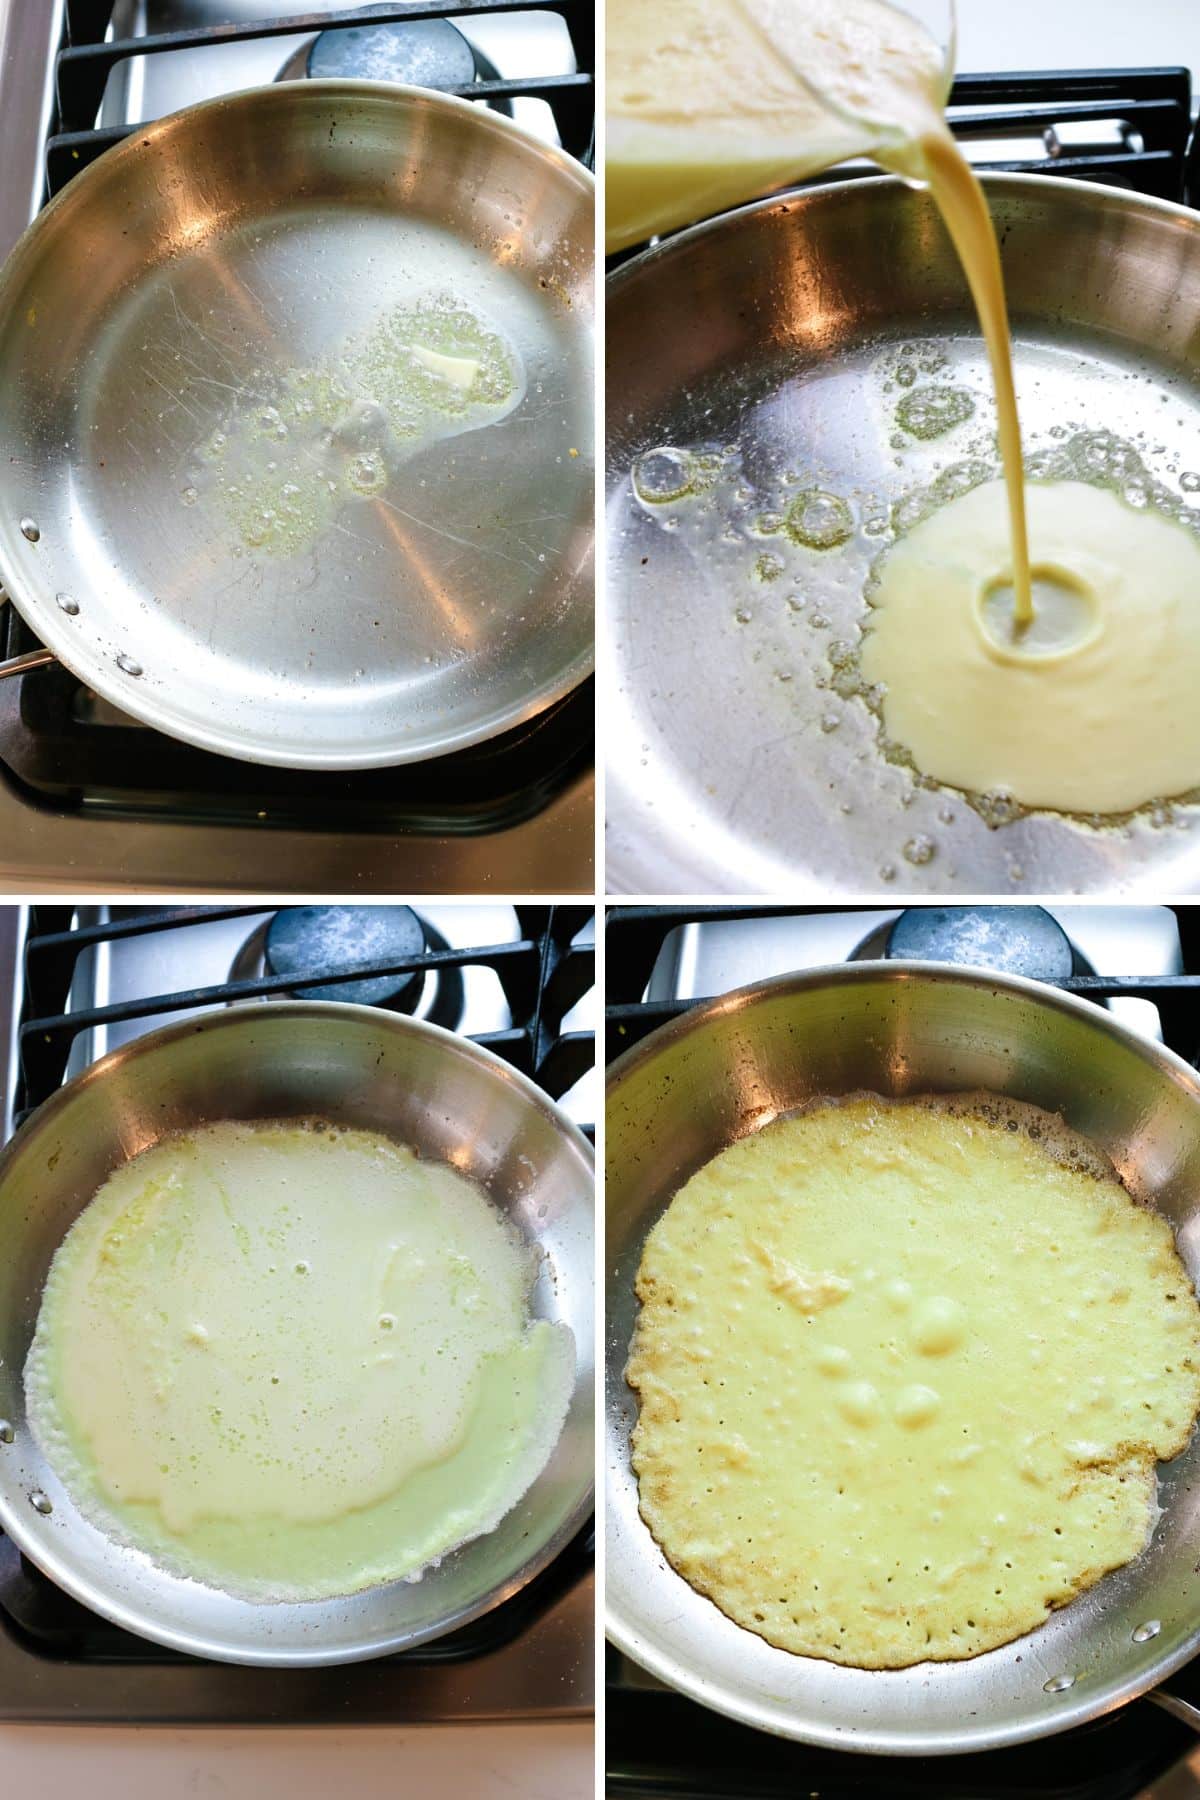 collage of images of gluten free crepes cooked in stainless steel: added butter, batter poured in, cooked until bubbles form, then more yellow crepe.